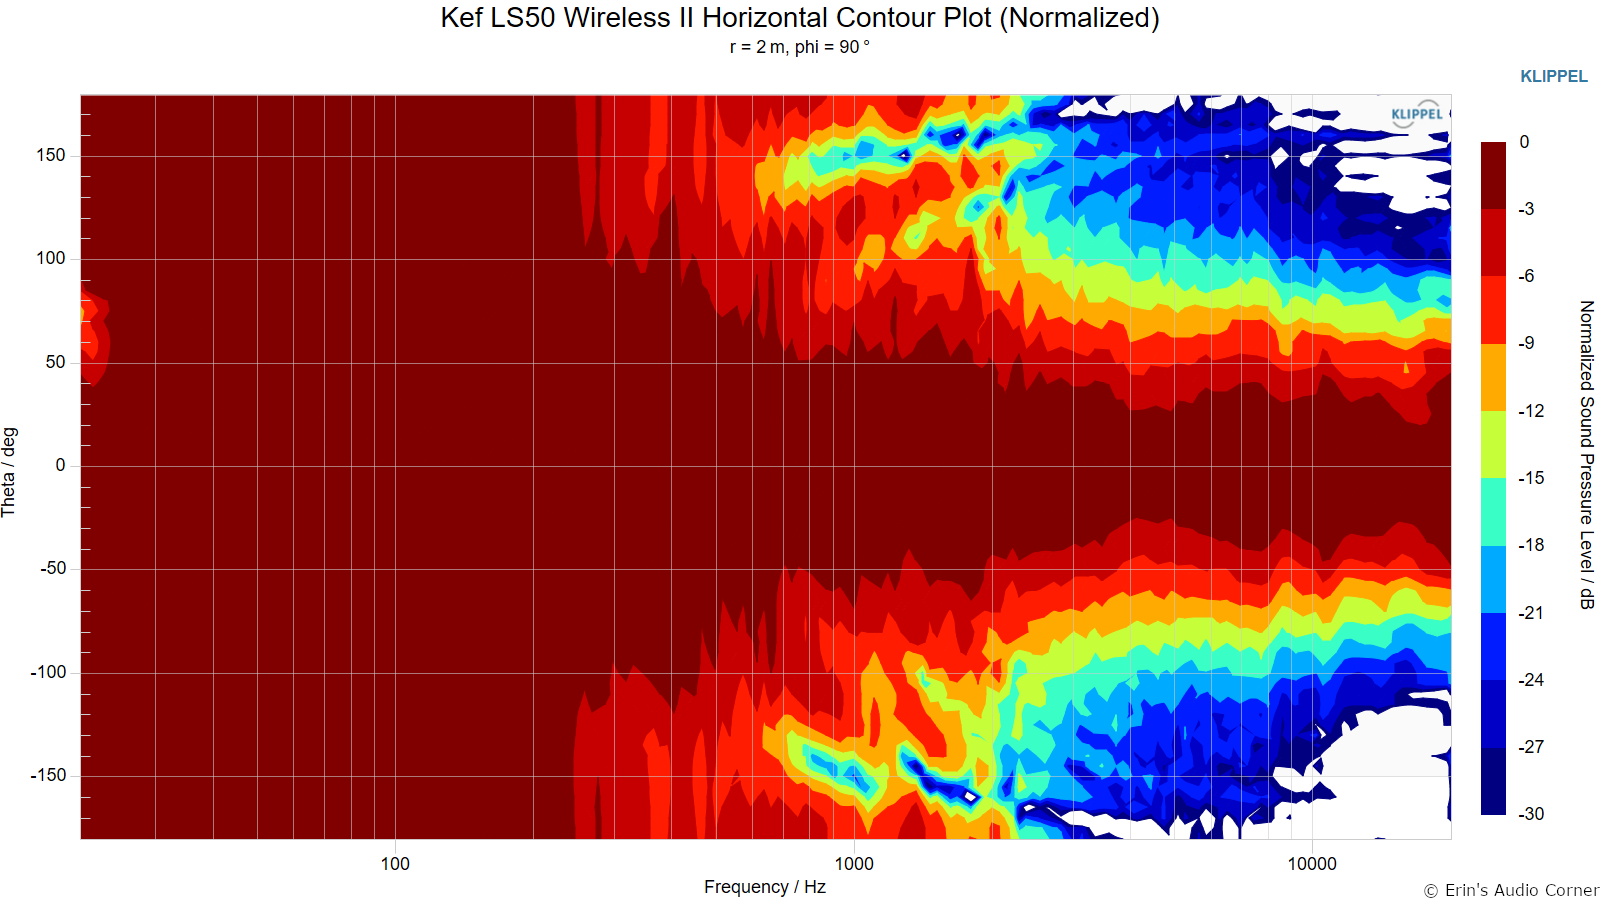 Kef%20LS50%20Wireless%20II%20Horizontal%20Contour%20Plot%20%28Normalized%29.png